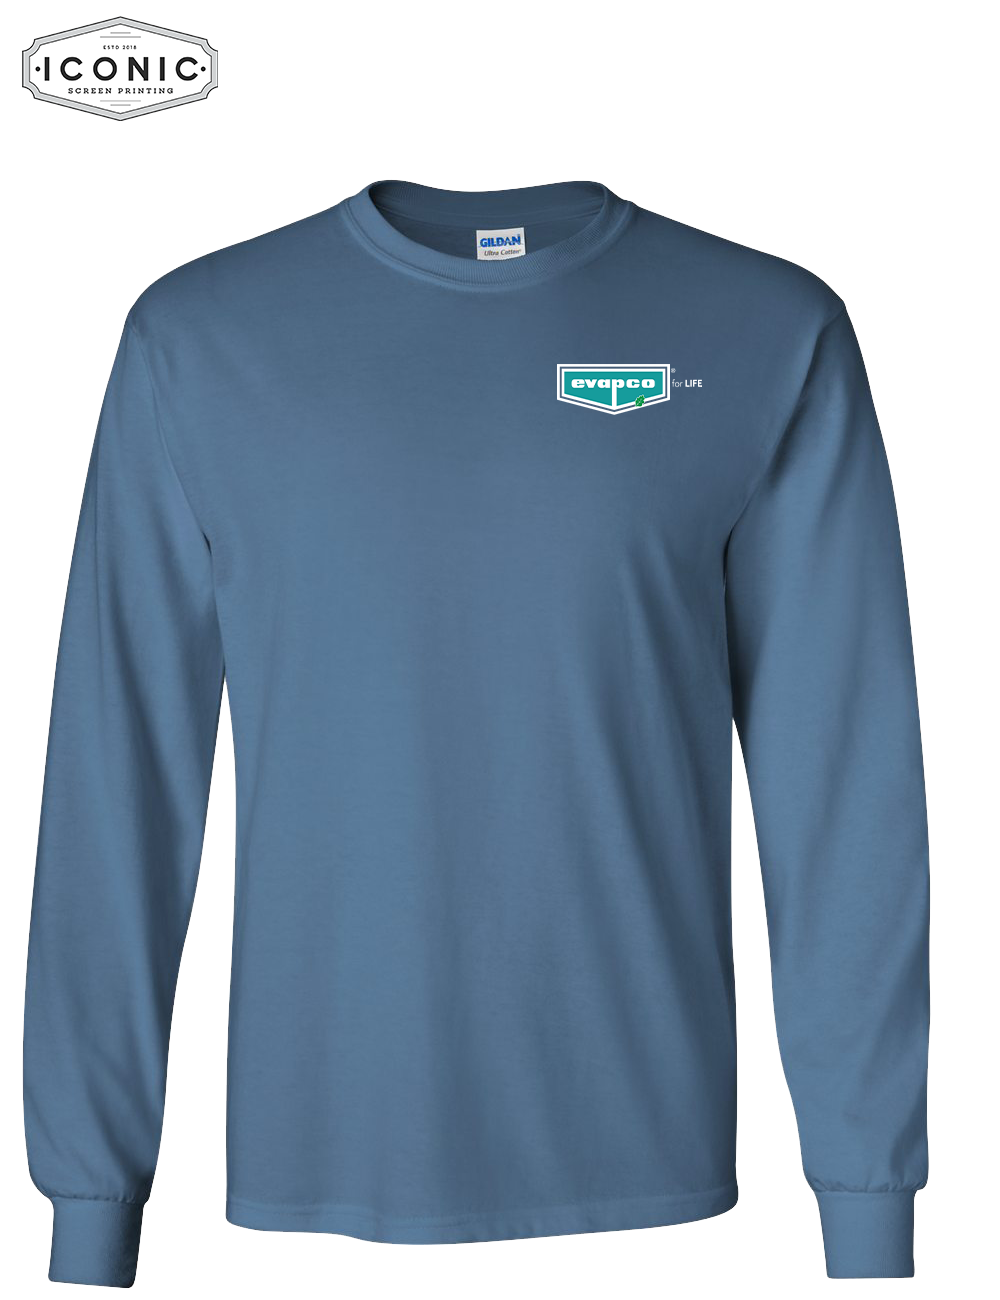 Evapco for Life - Ultra Cotton Long Sleeve - Print